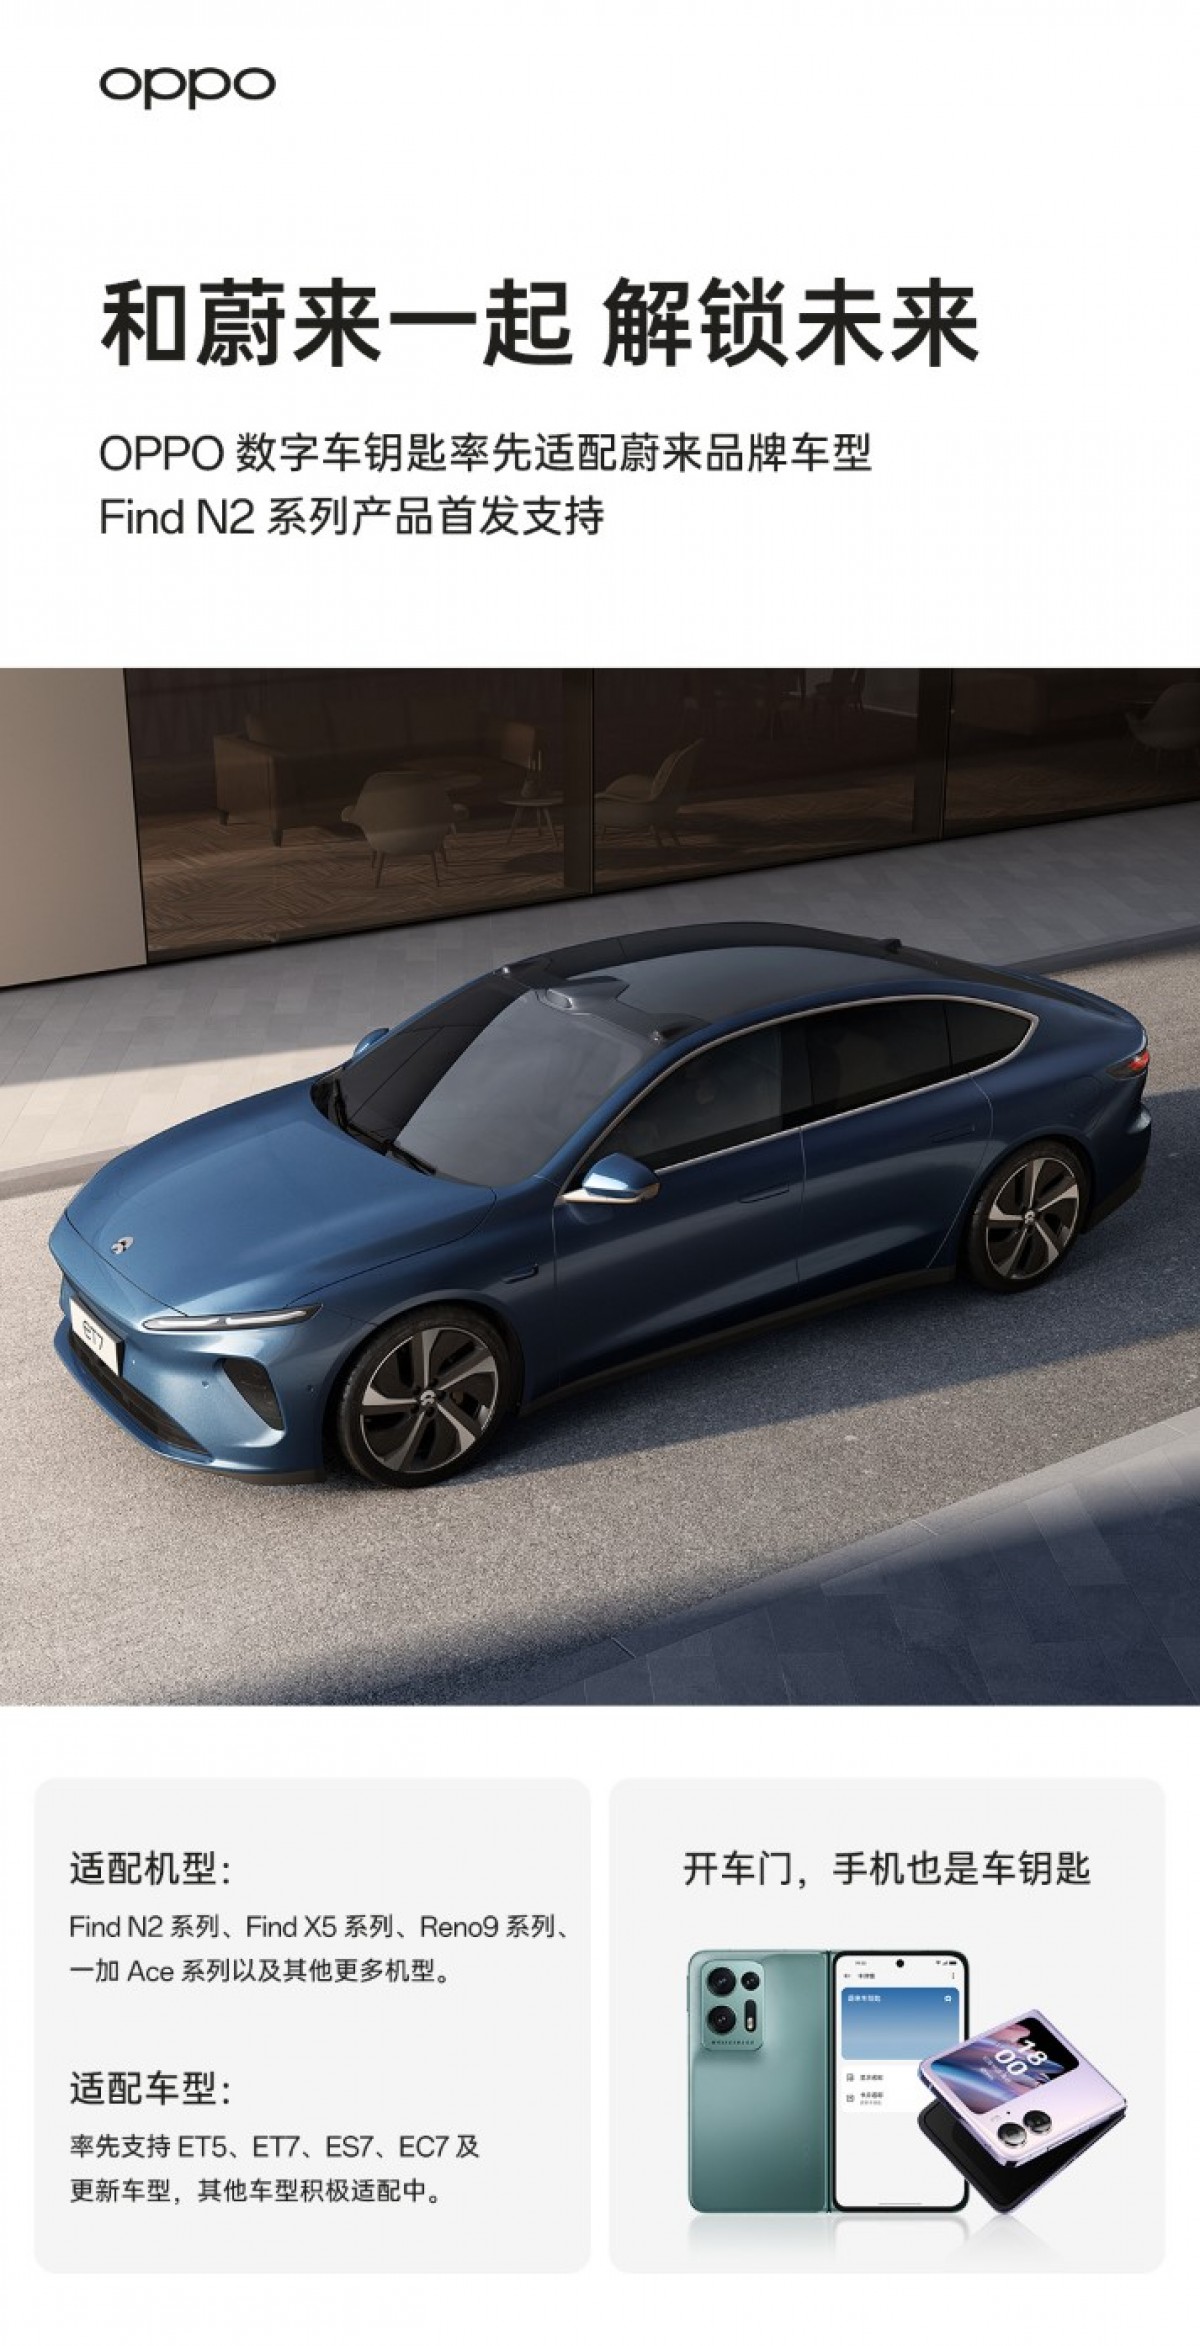 Oppo and Vivo smartphones can be used as keys for Nio electric cars